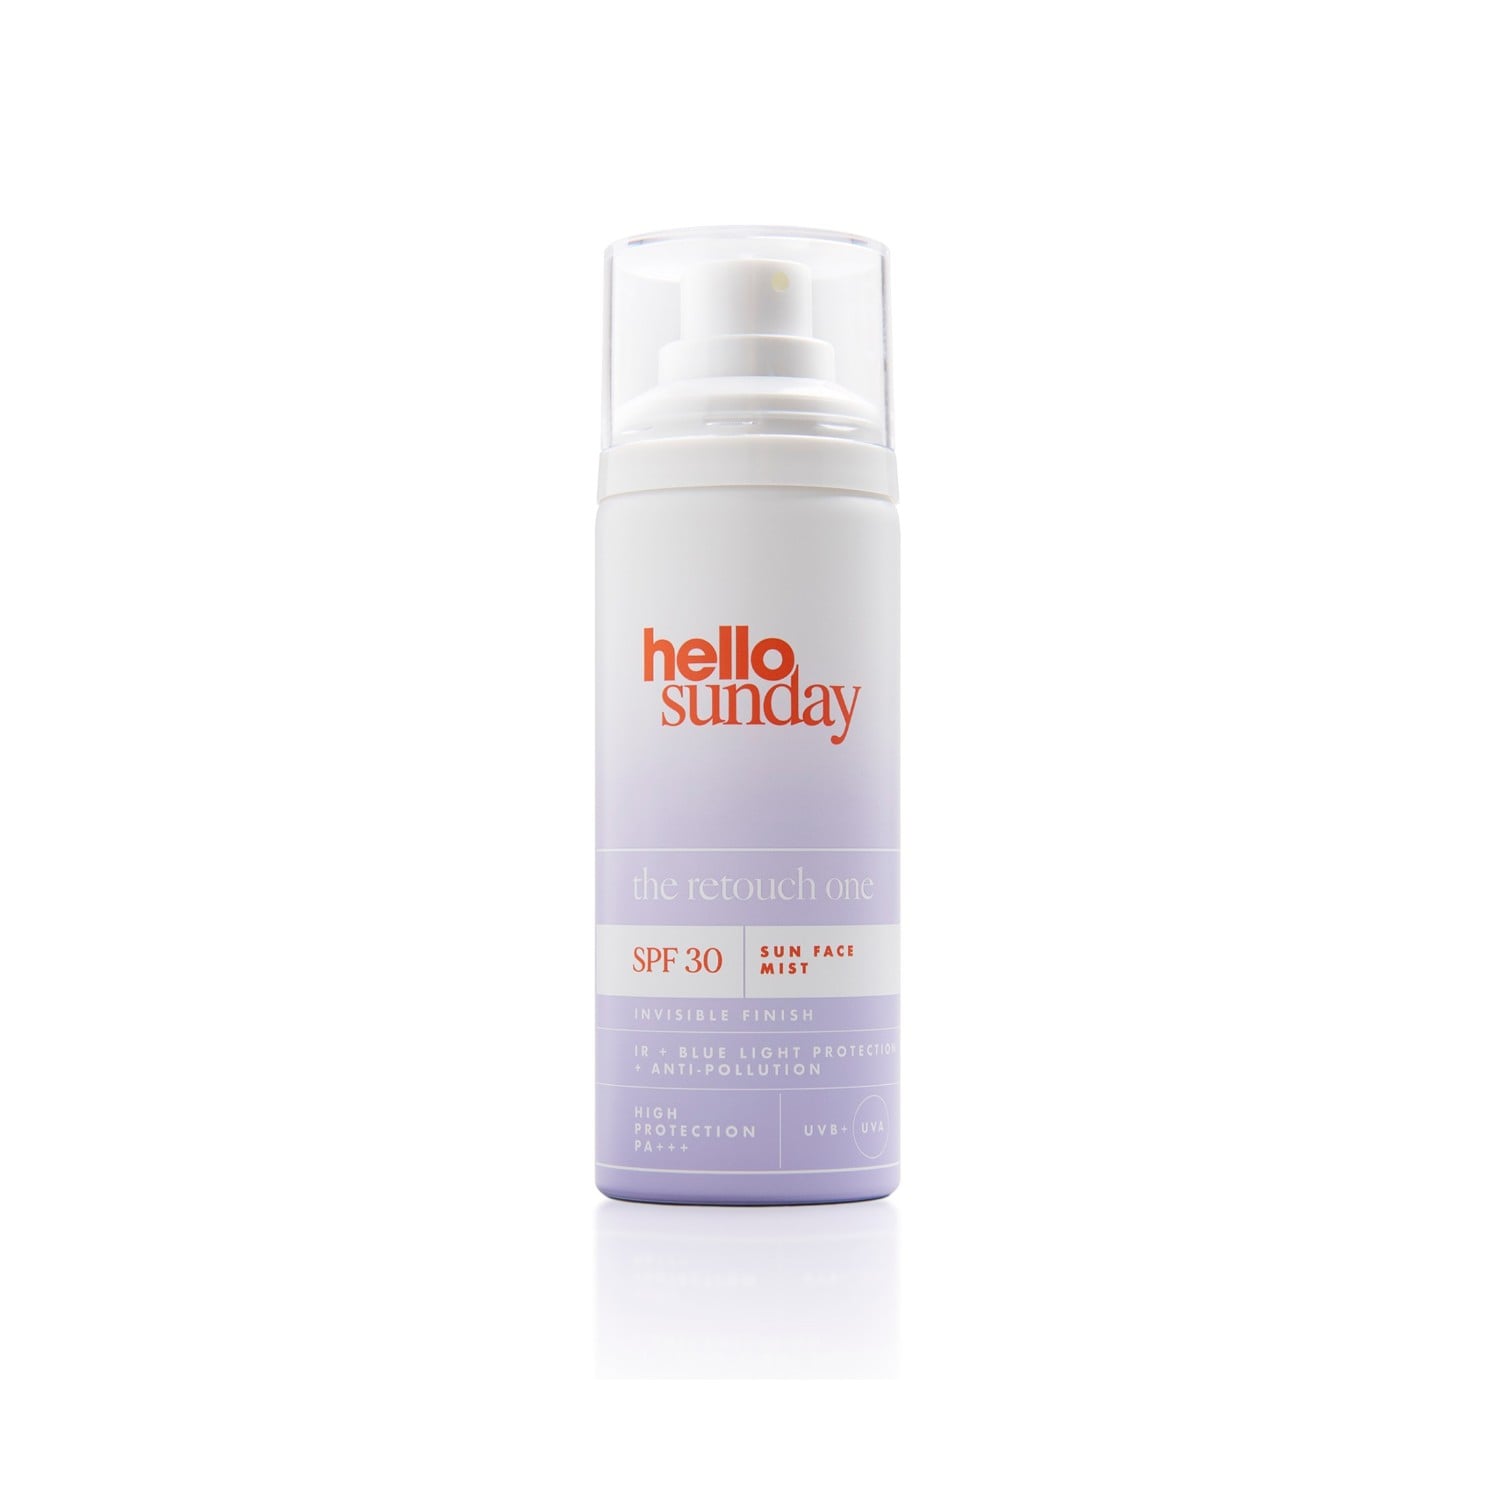 Hello Sunday The Retouch One - Face Mist SPF 30